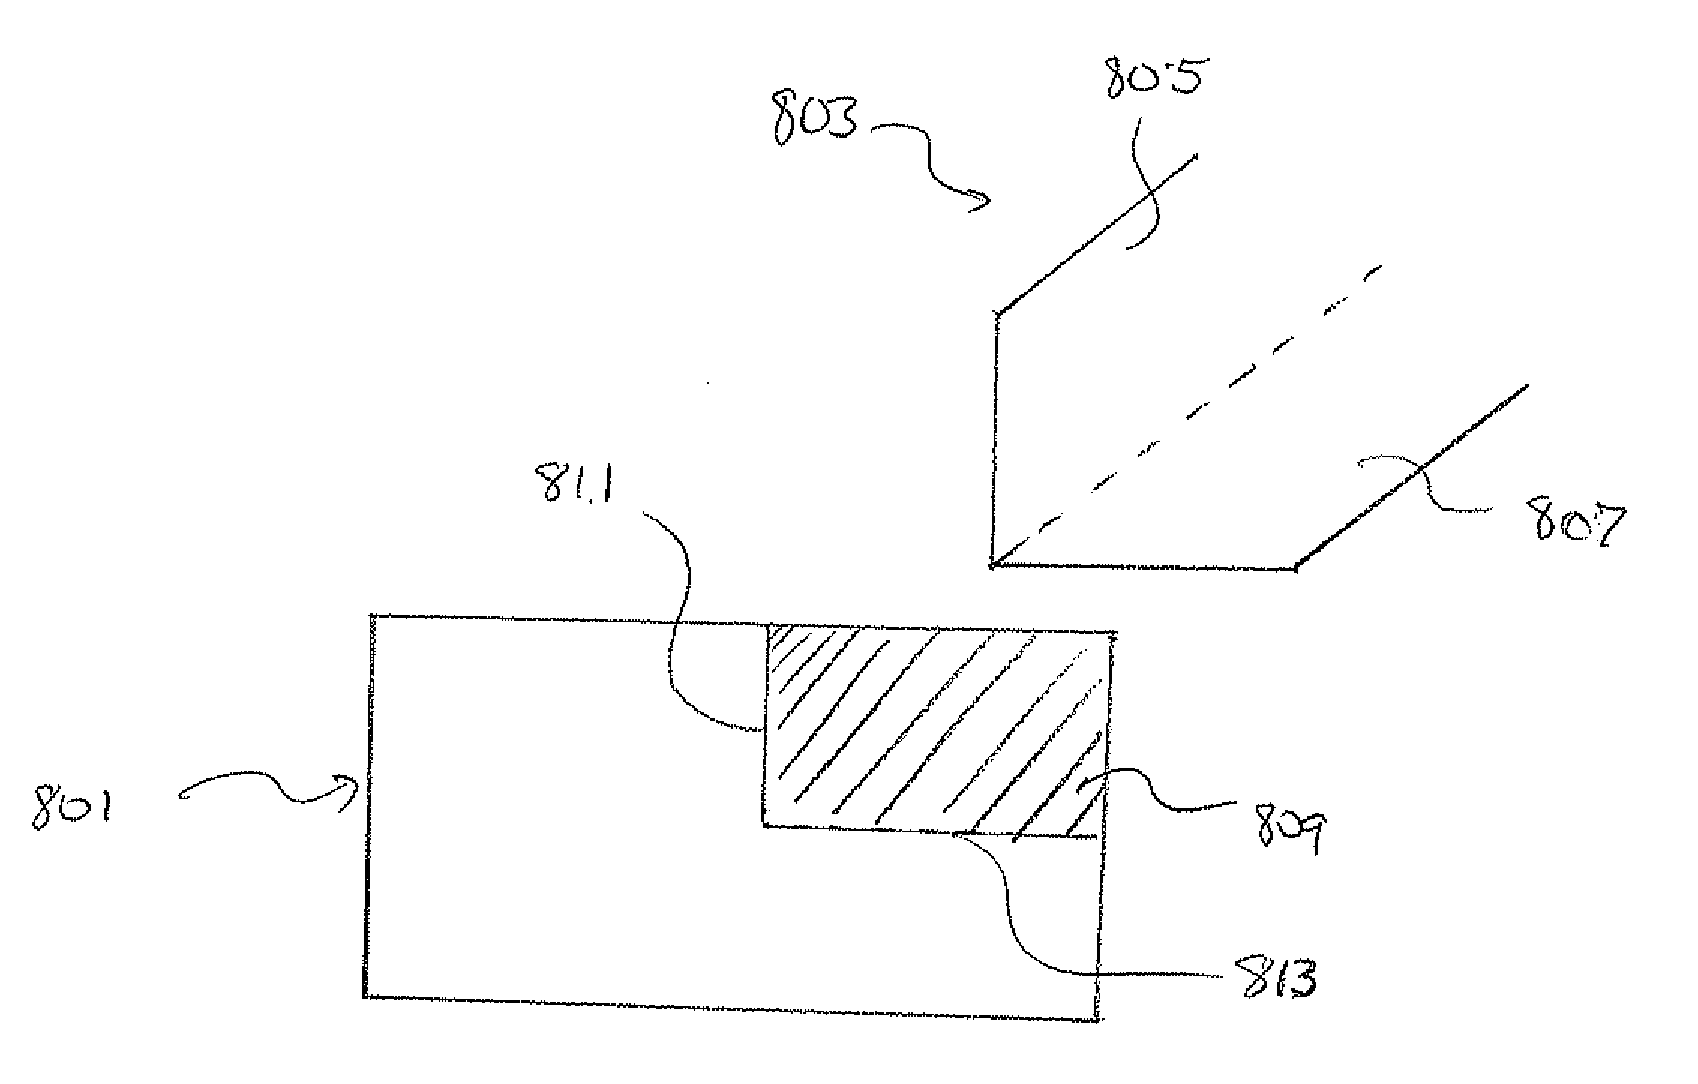 Abrasive Articles with Novel Structures and Methods for Grinding